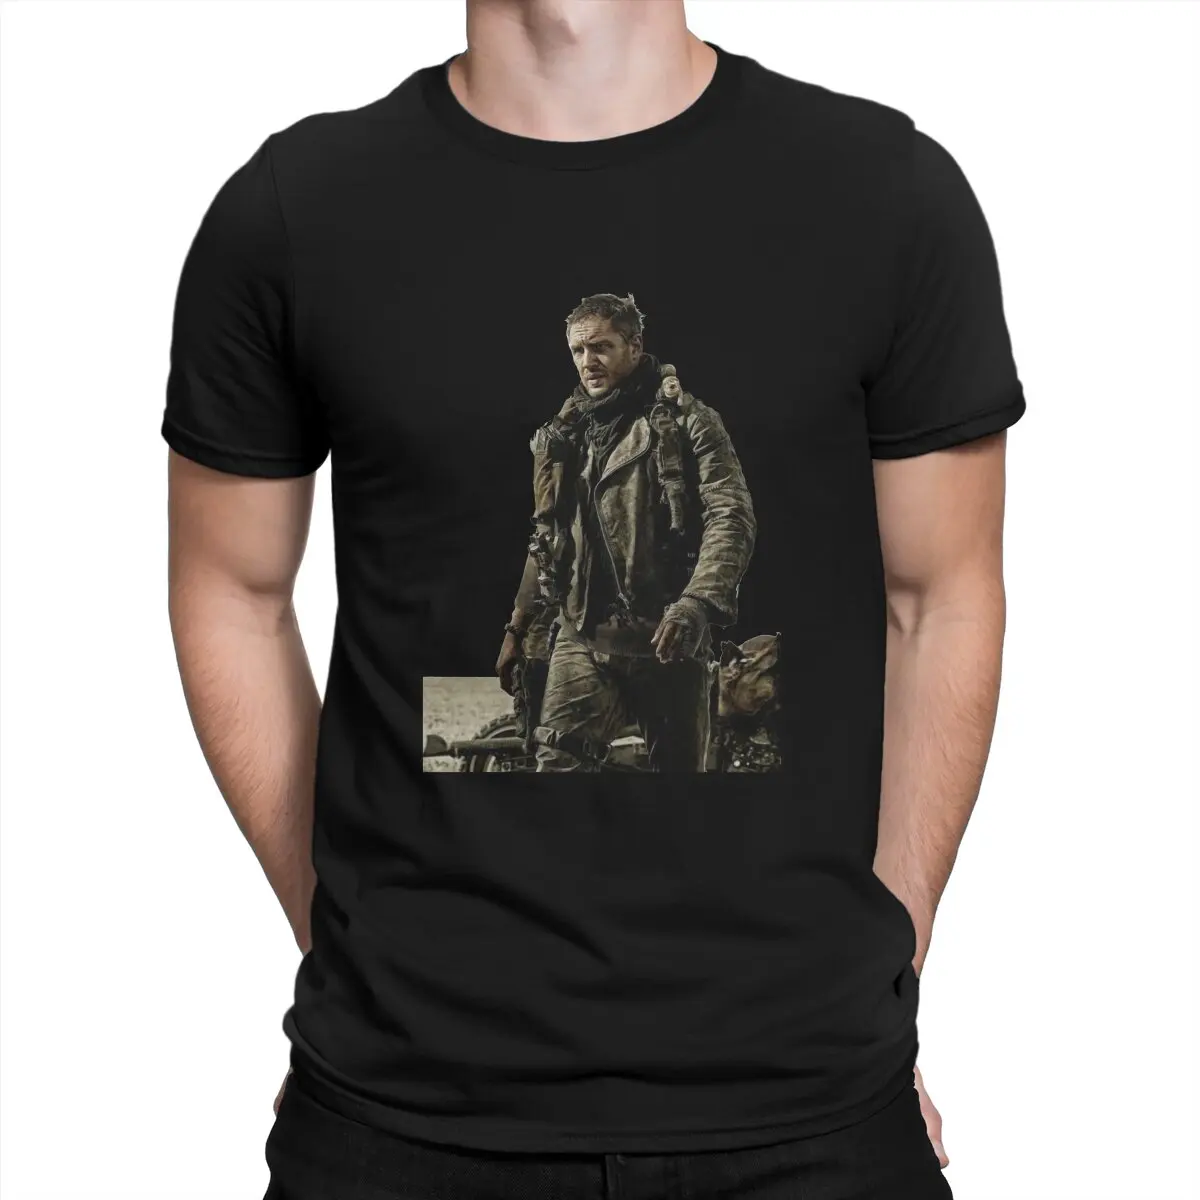 

Popular Action Movies T Shirts Men 100% Cotton Novelty T-Shirt Round Collar Mad Max 4 Tees Short Sleeve Clothes Gift Idea